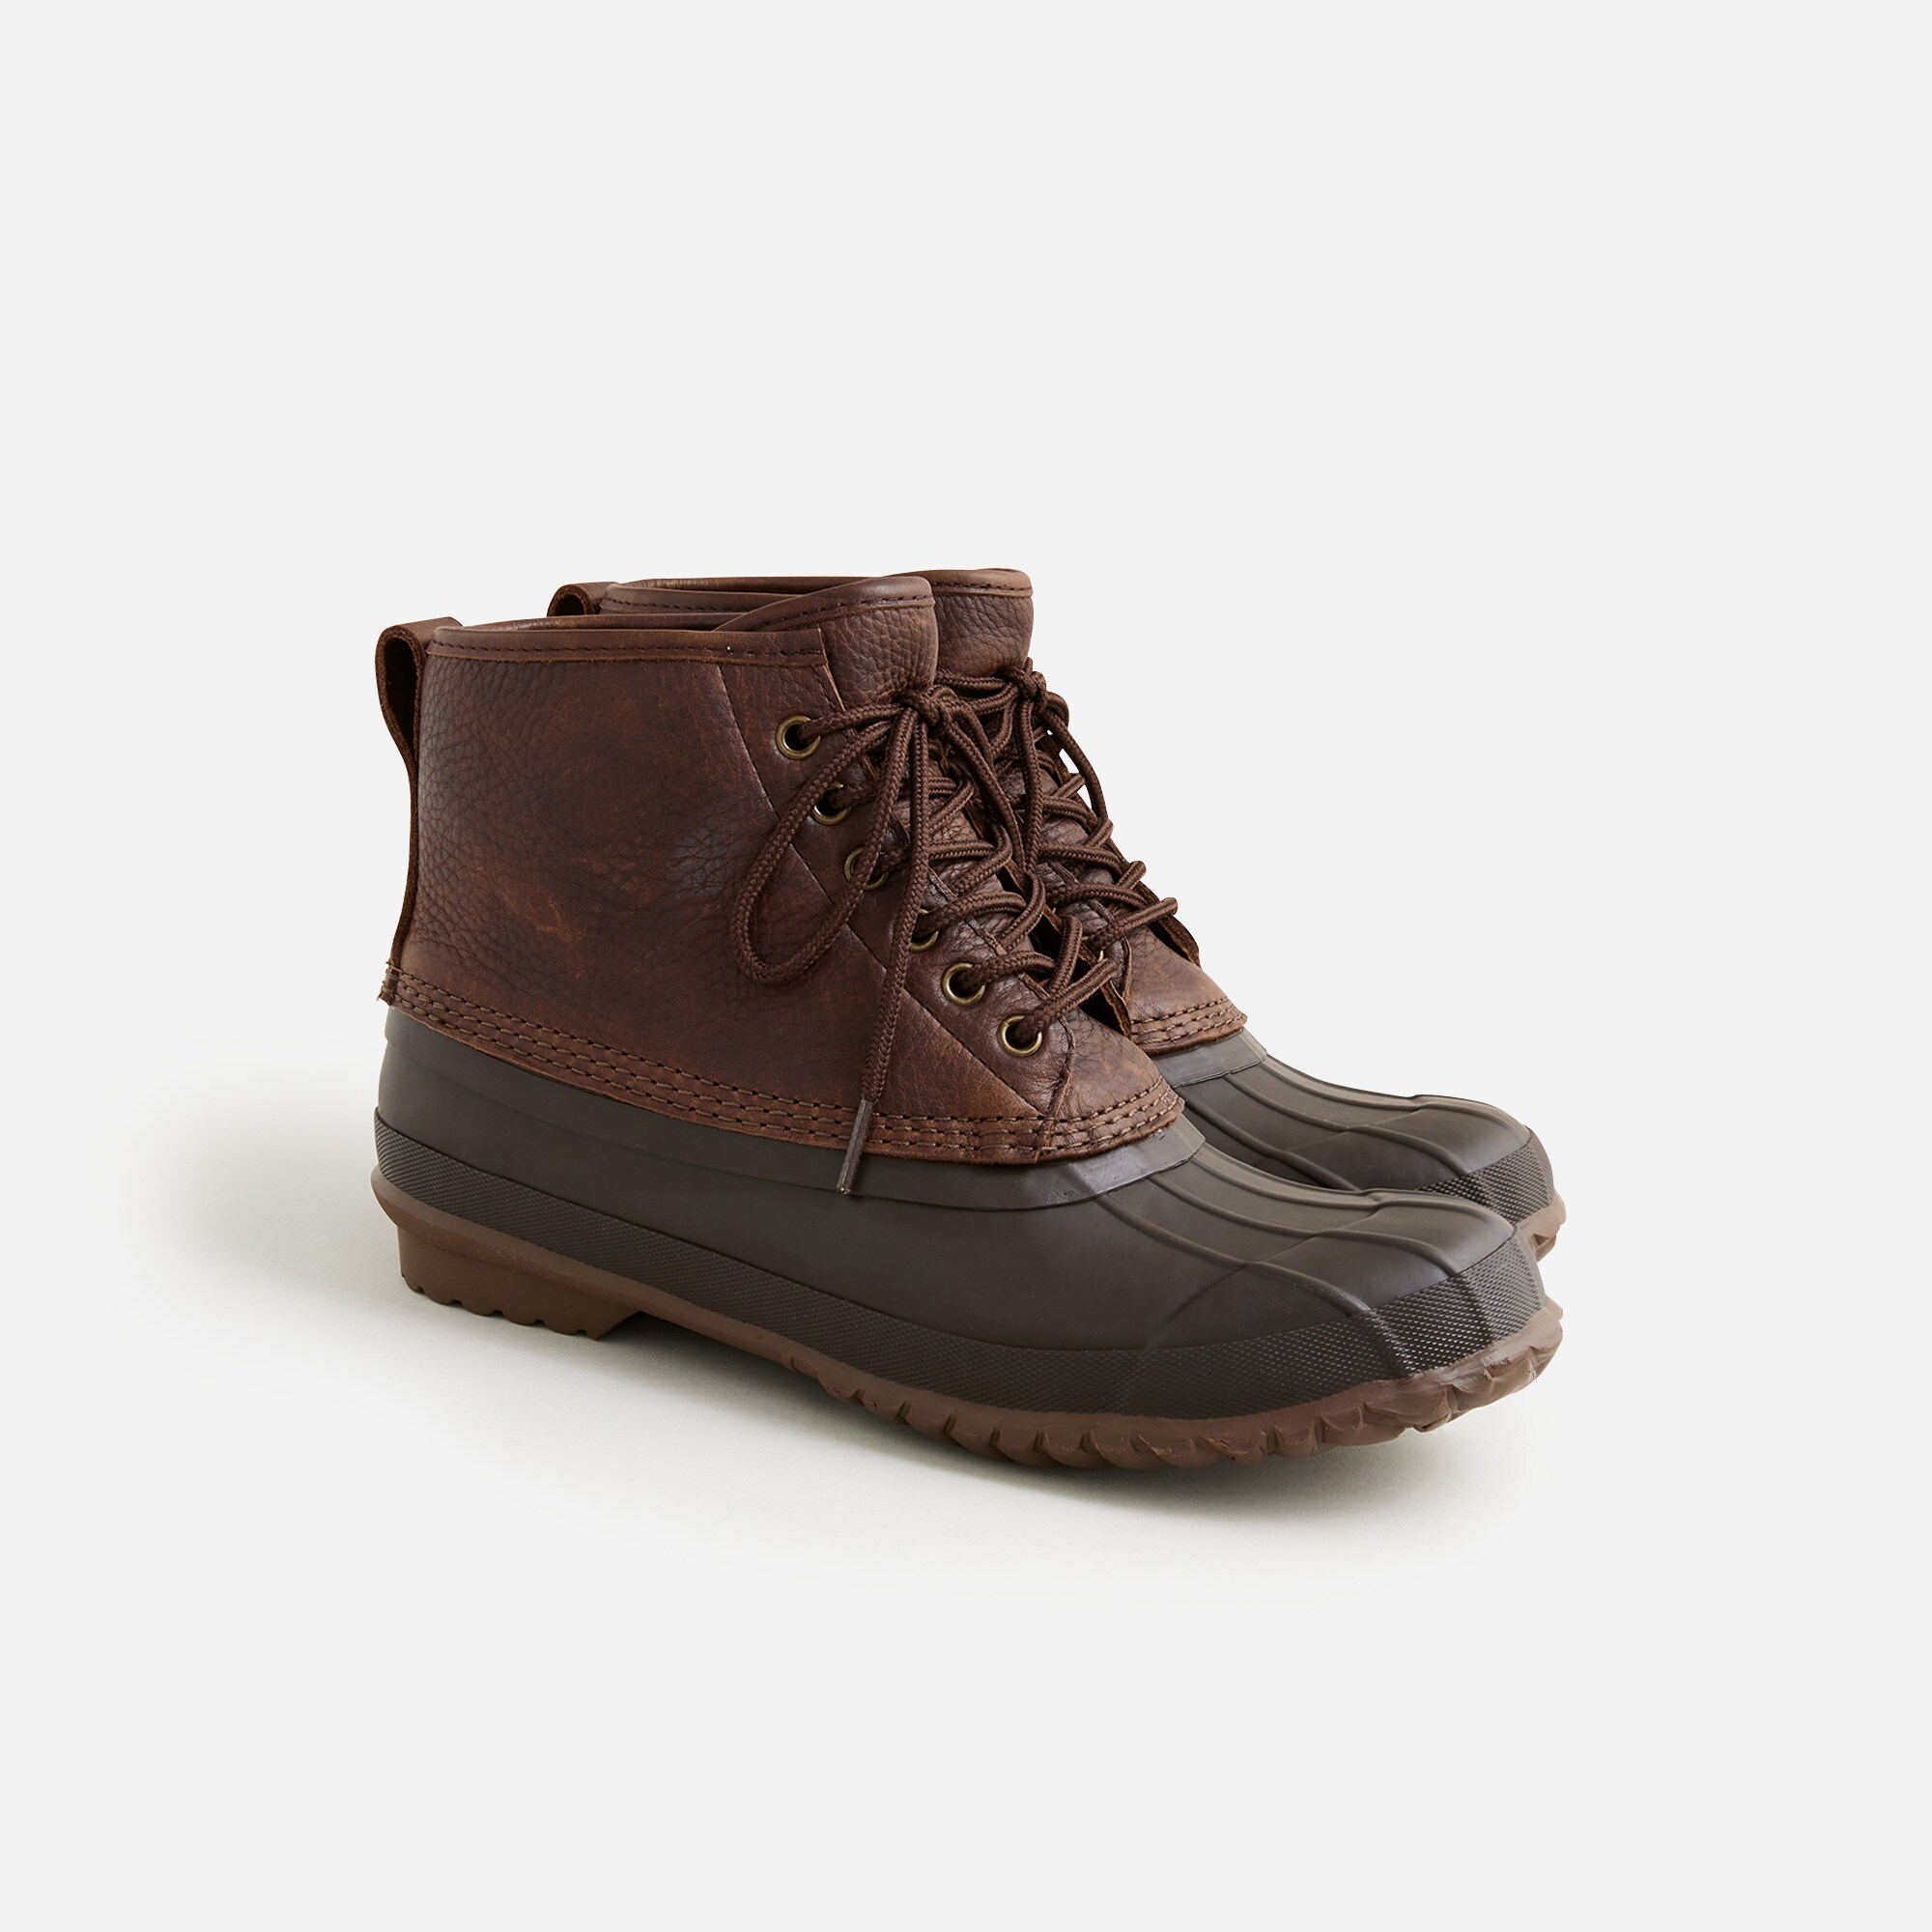 mens Heritage duck boots in tumbled leather